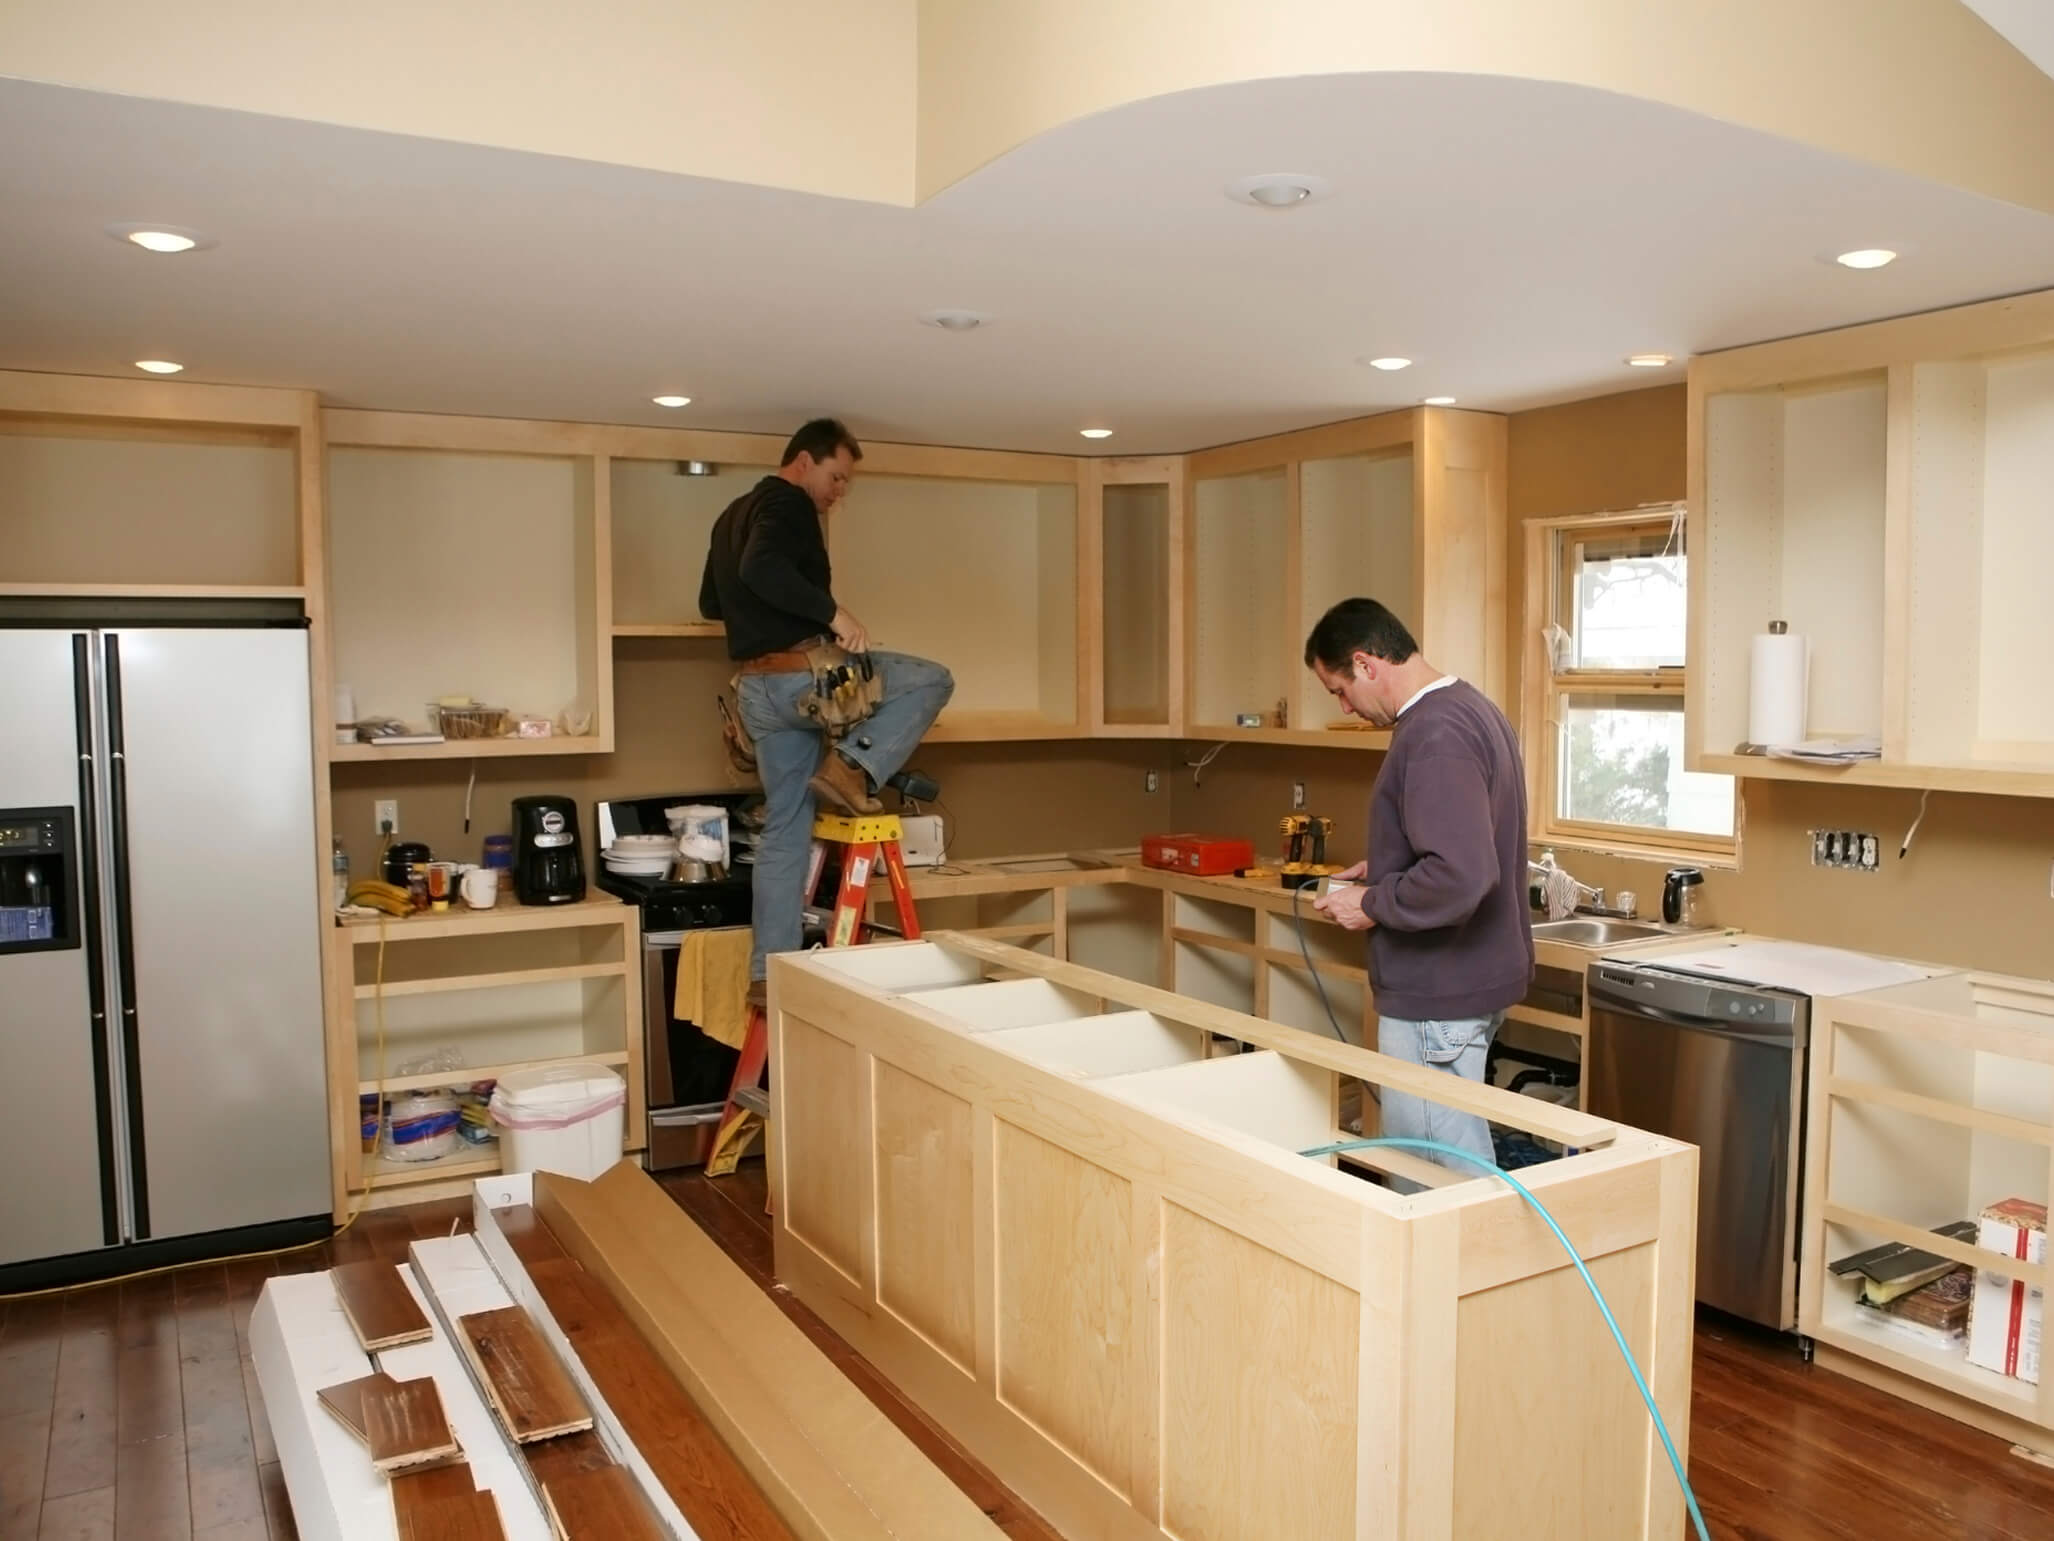 Oregon home with contractors renovating kitchen